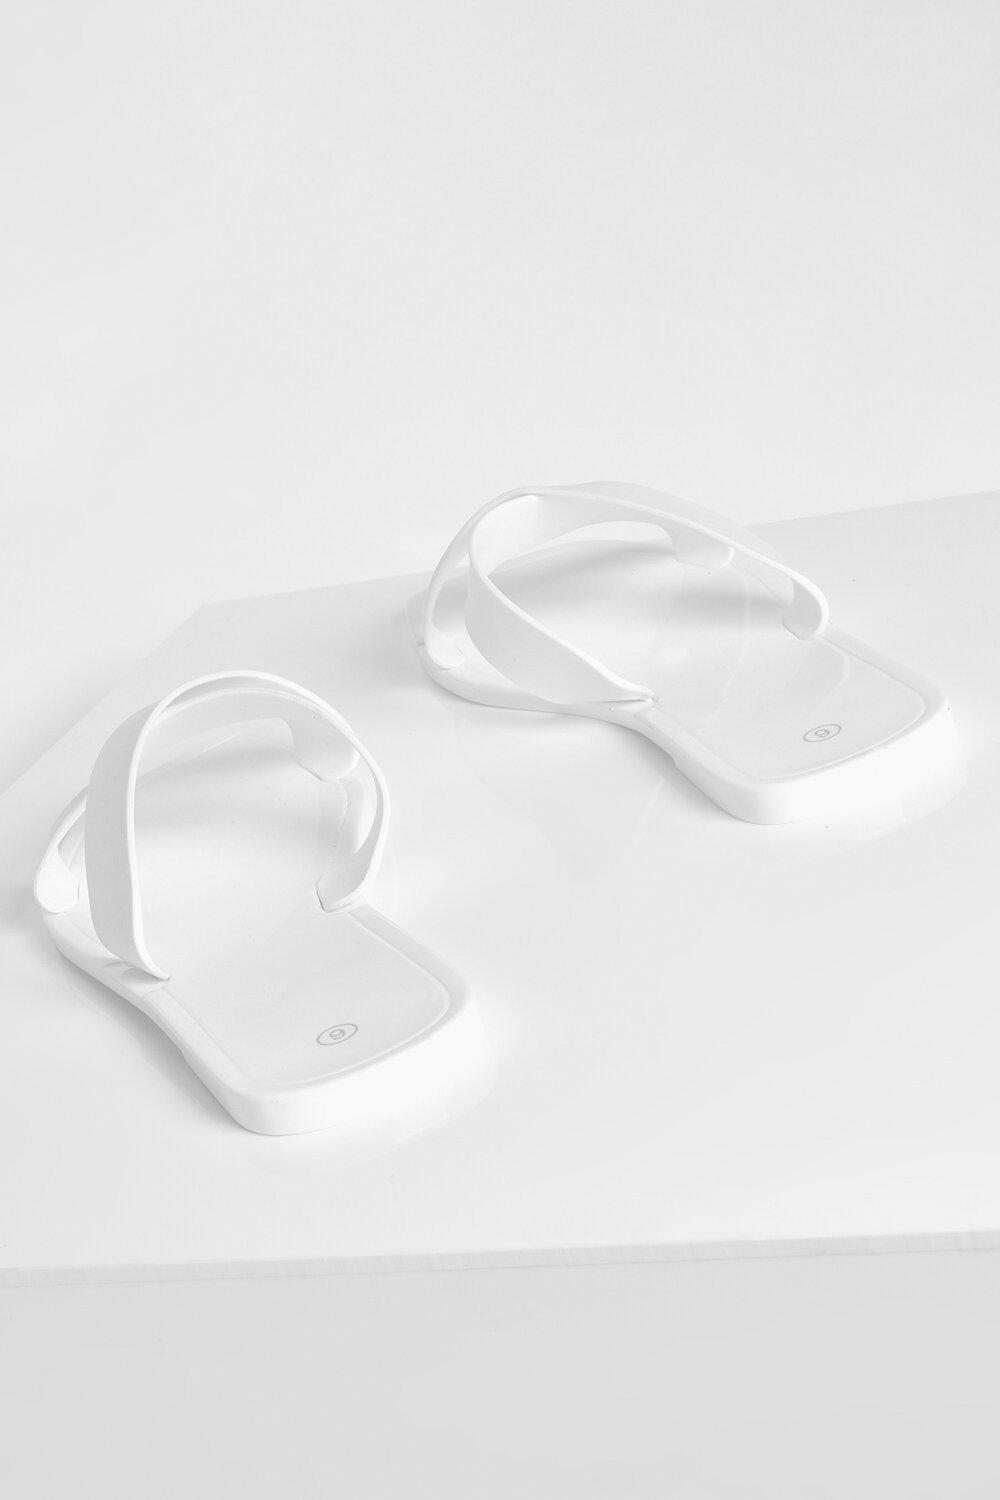 wide width jelly sandals